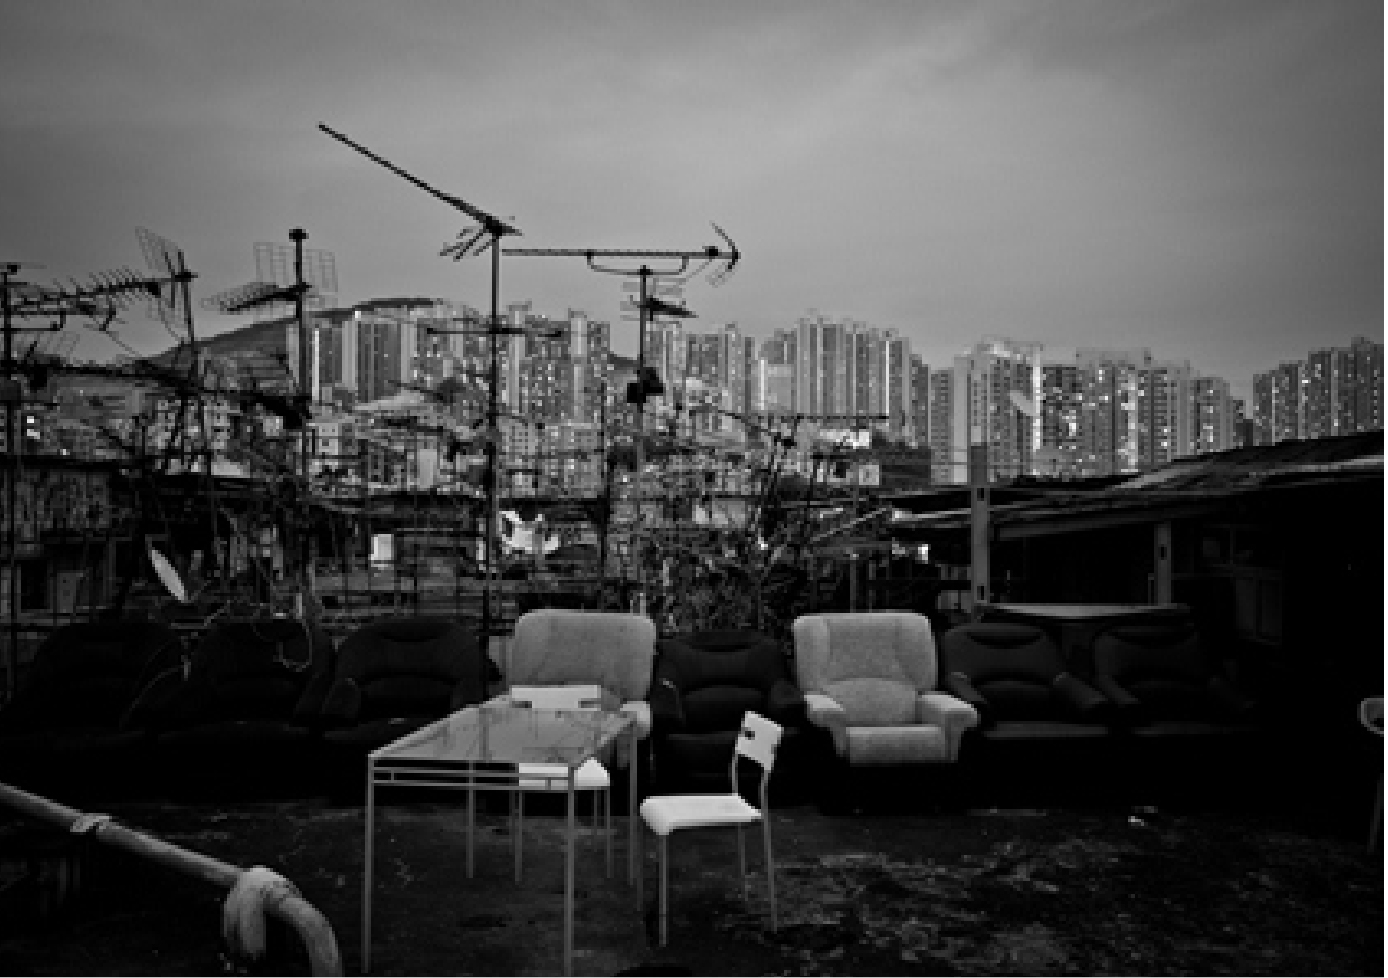 Sojourning as tempura – Inadequate Housing Photo Exhibition